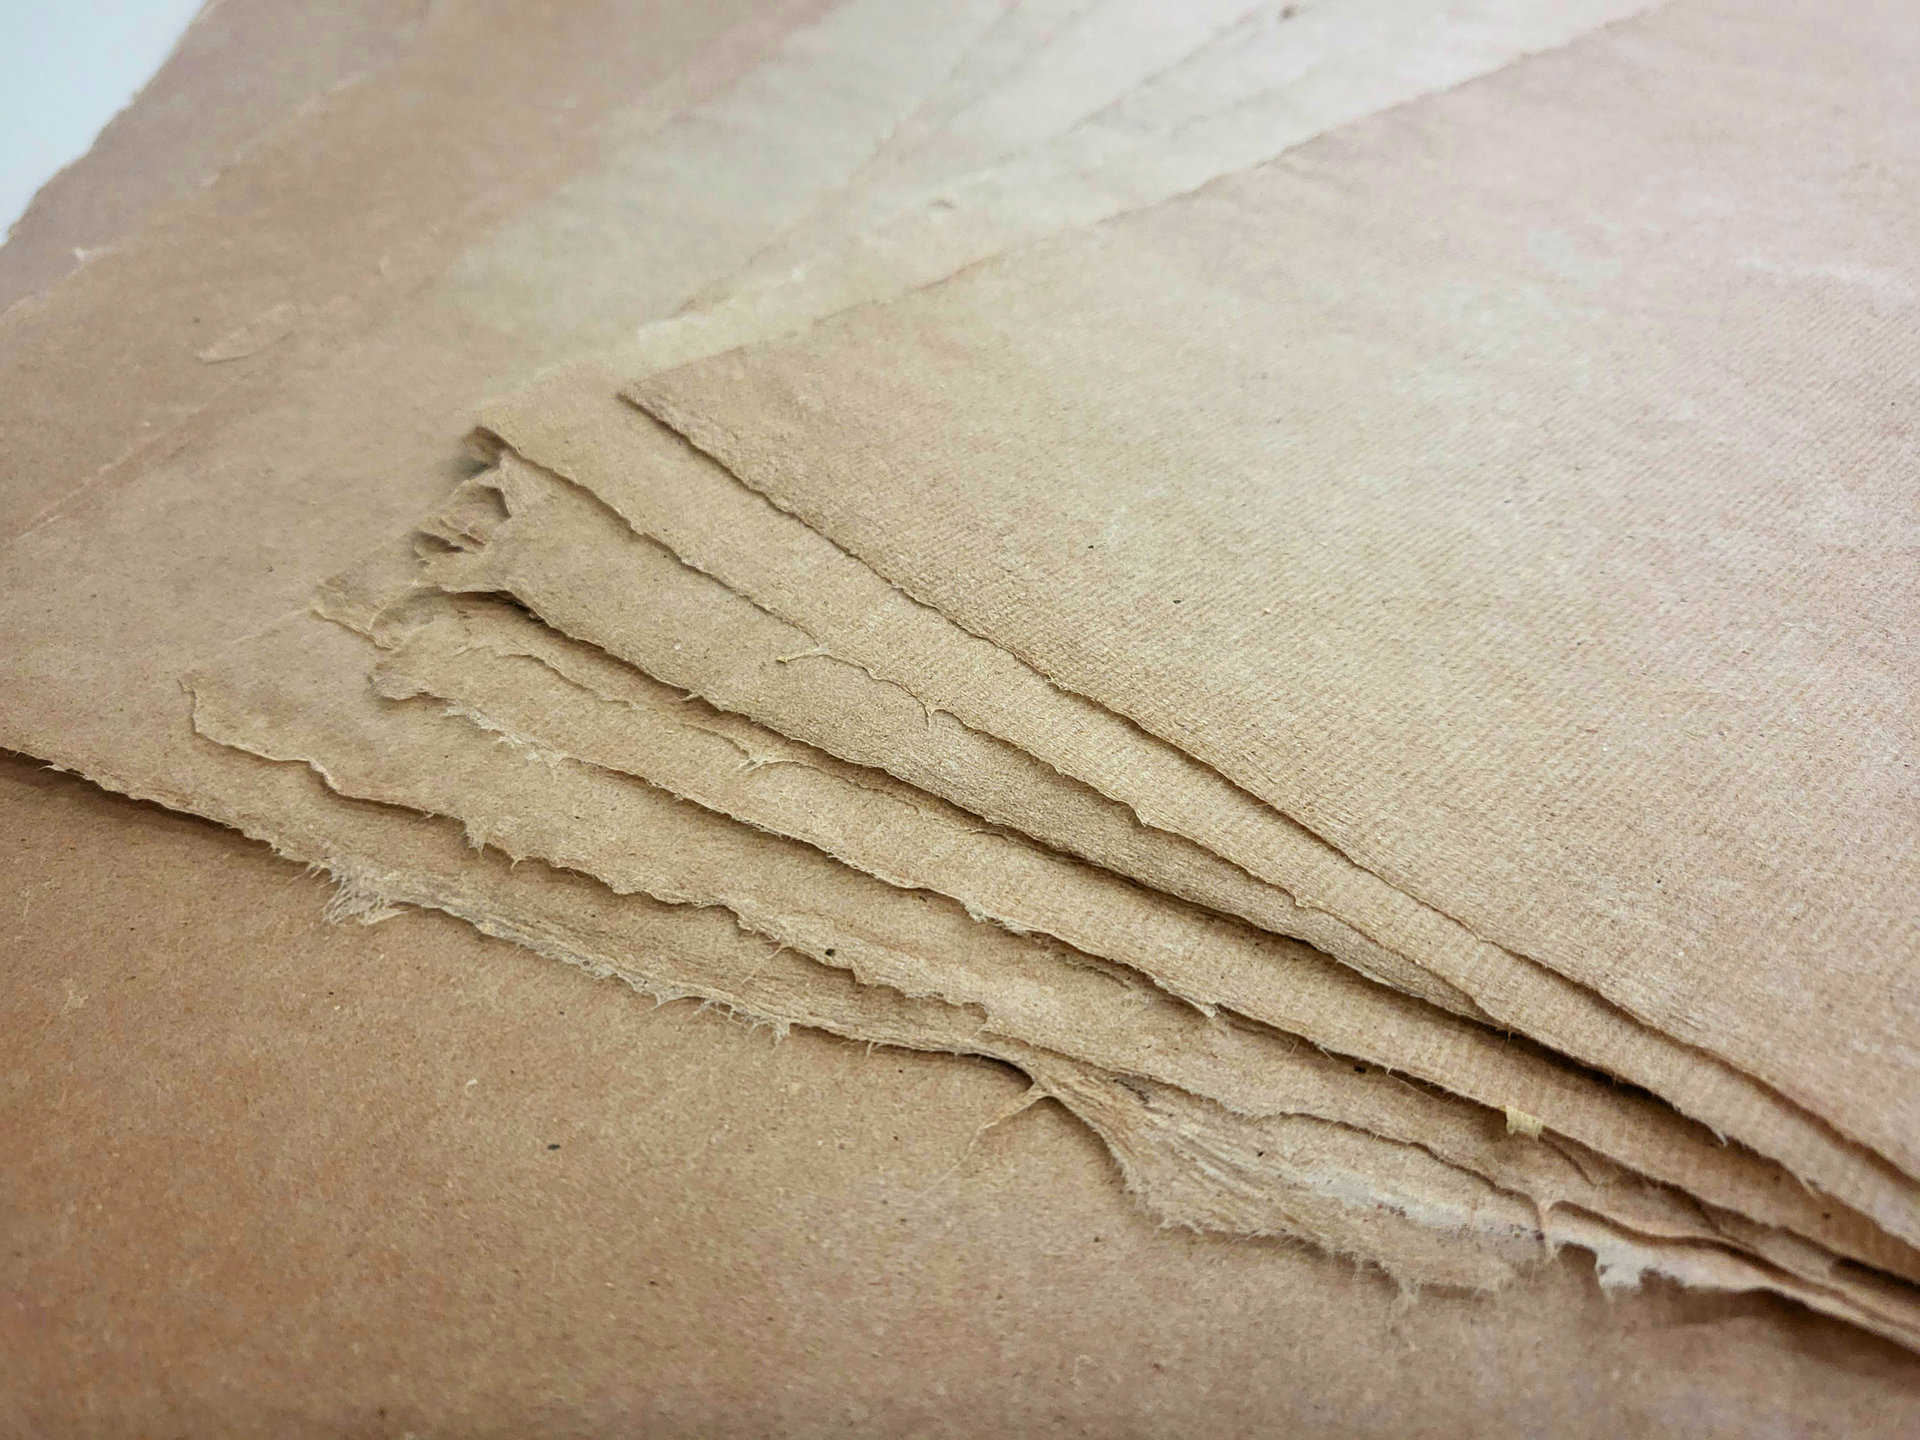 Modern Papermaking